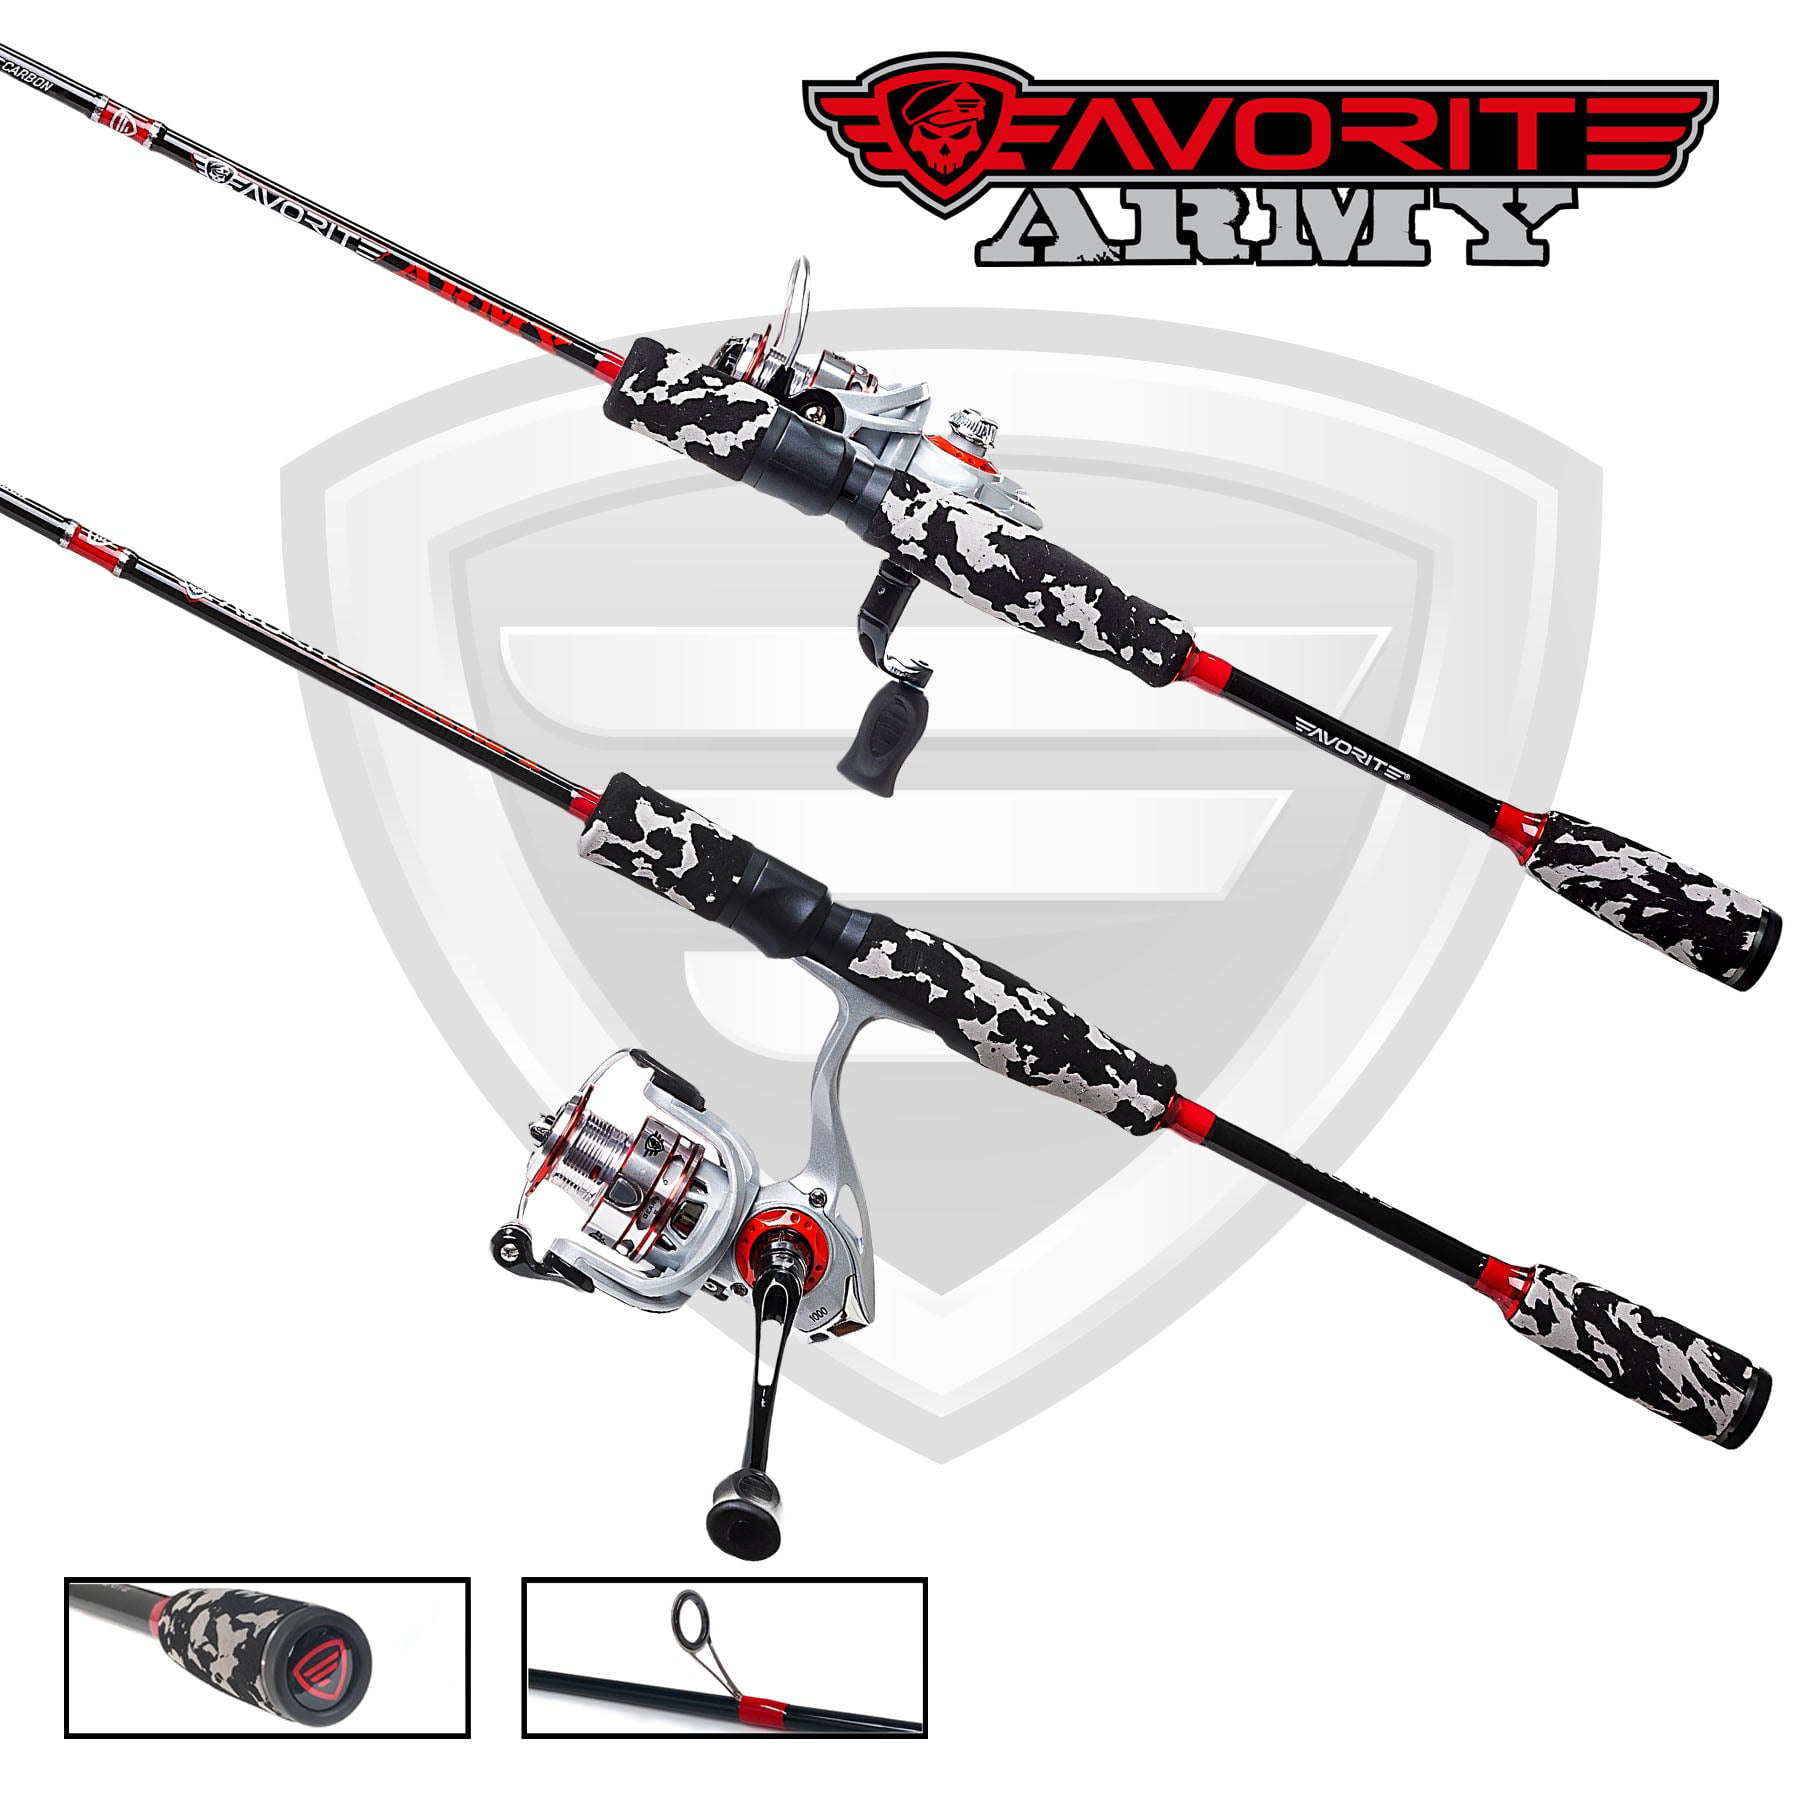 Favorite Fishing 6 ft. Favorite Army Crappie Spinning Reel Combo - 2 Piece